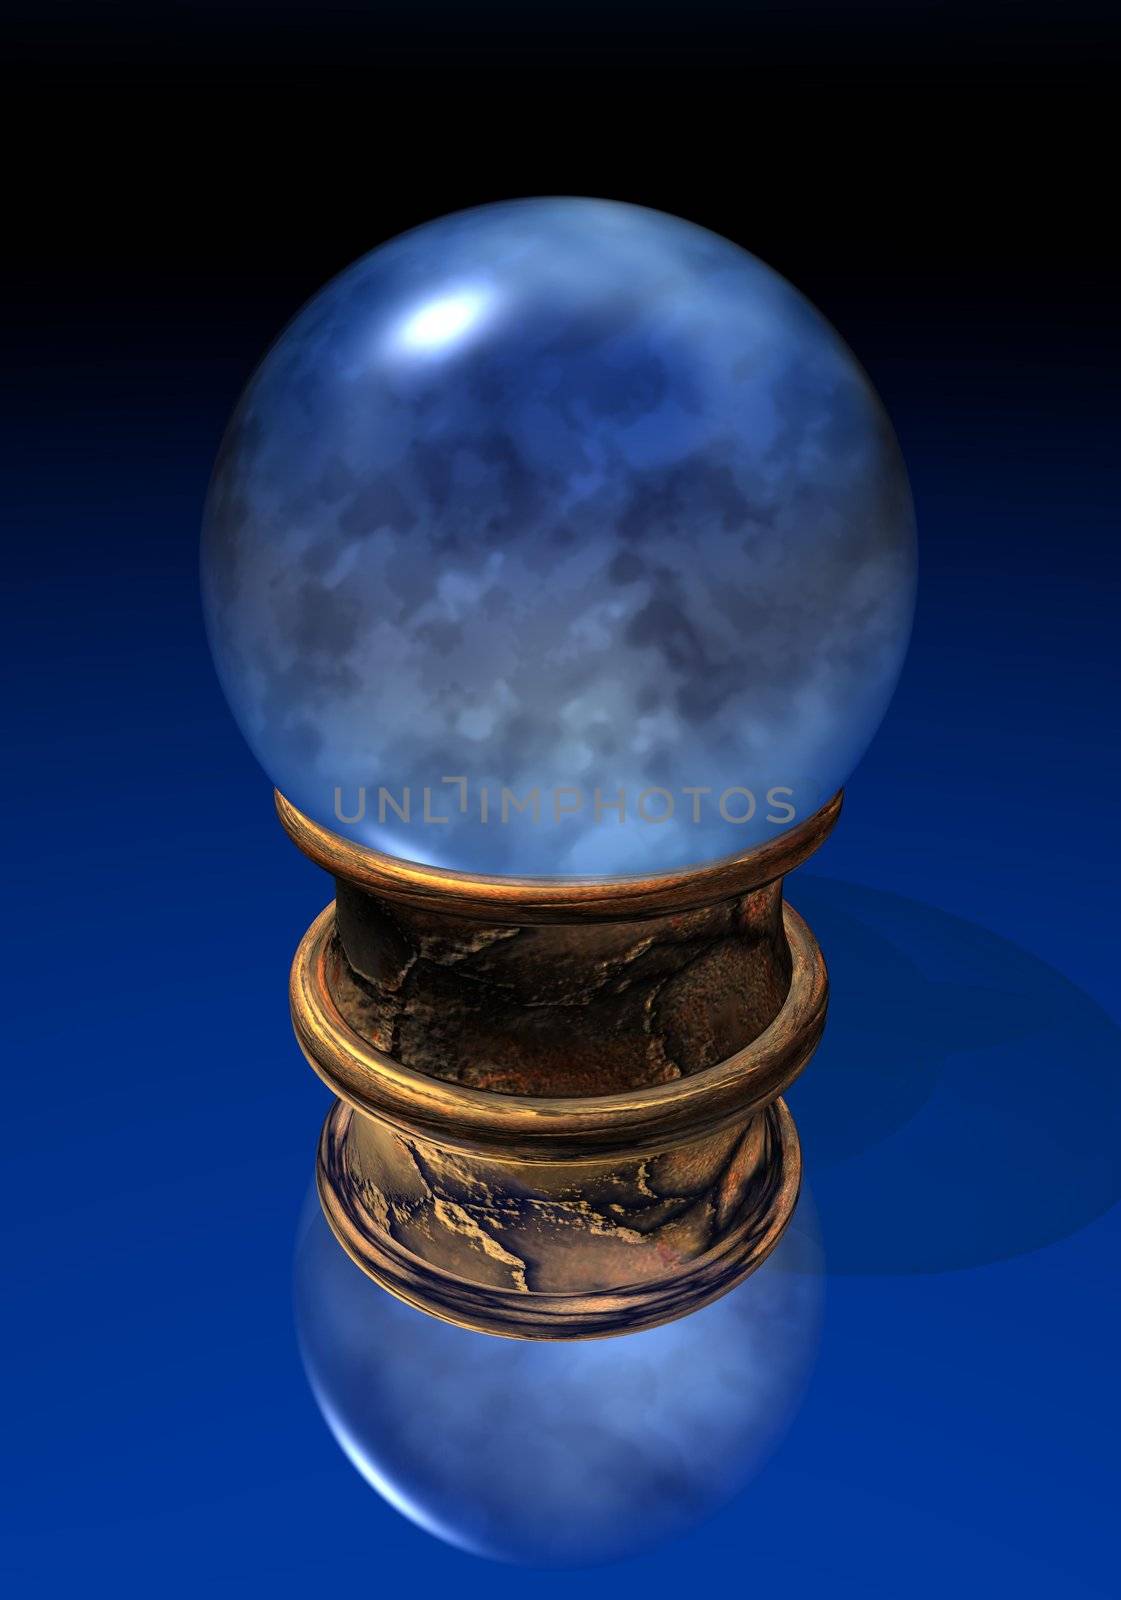 Blue crystal ball upon golden base in black and blue background